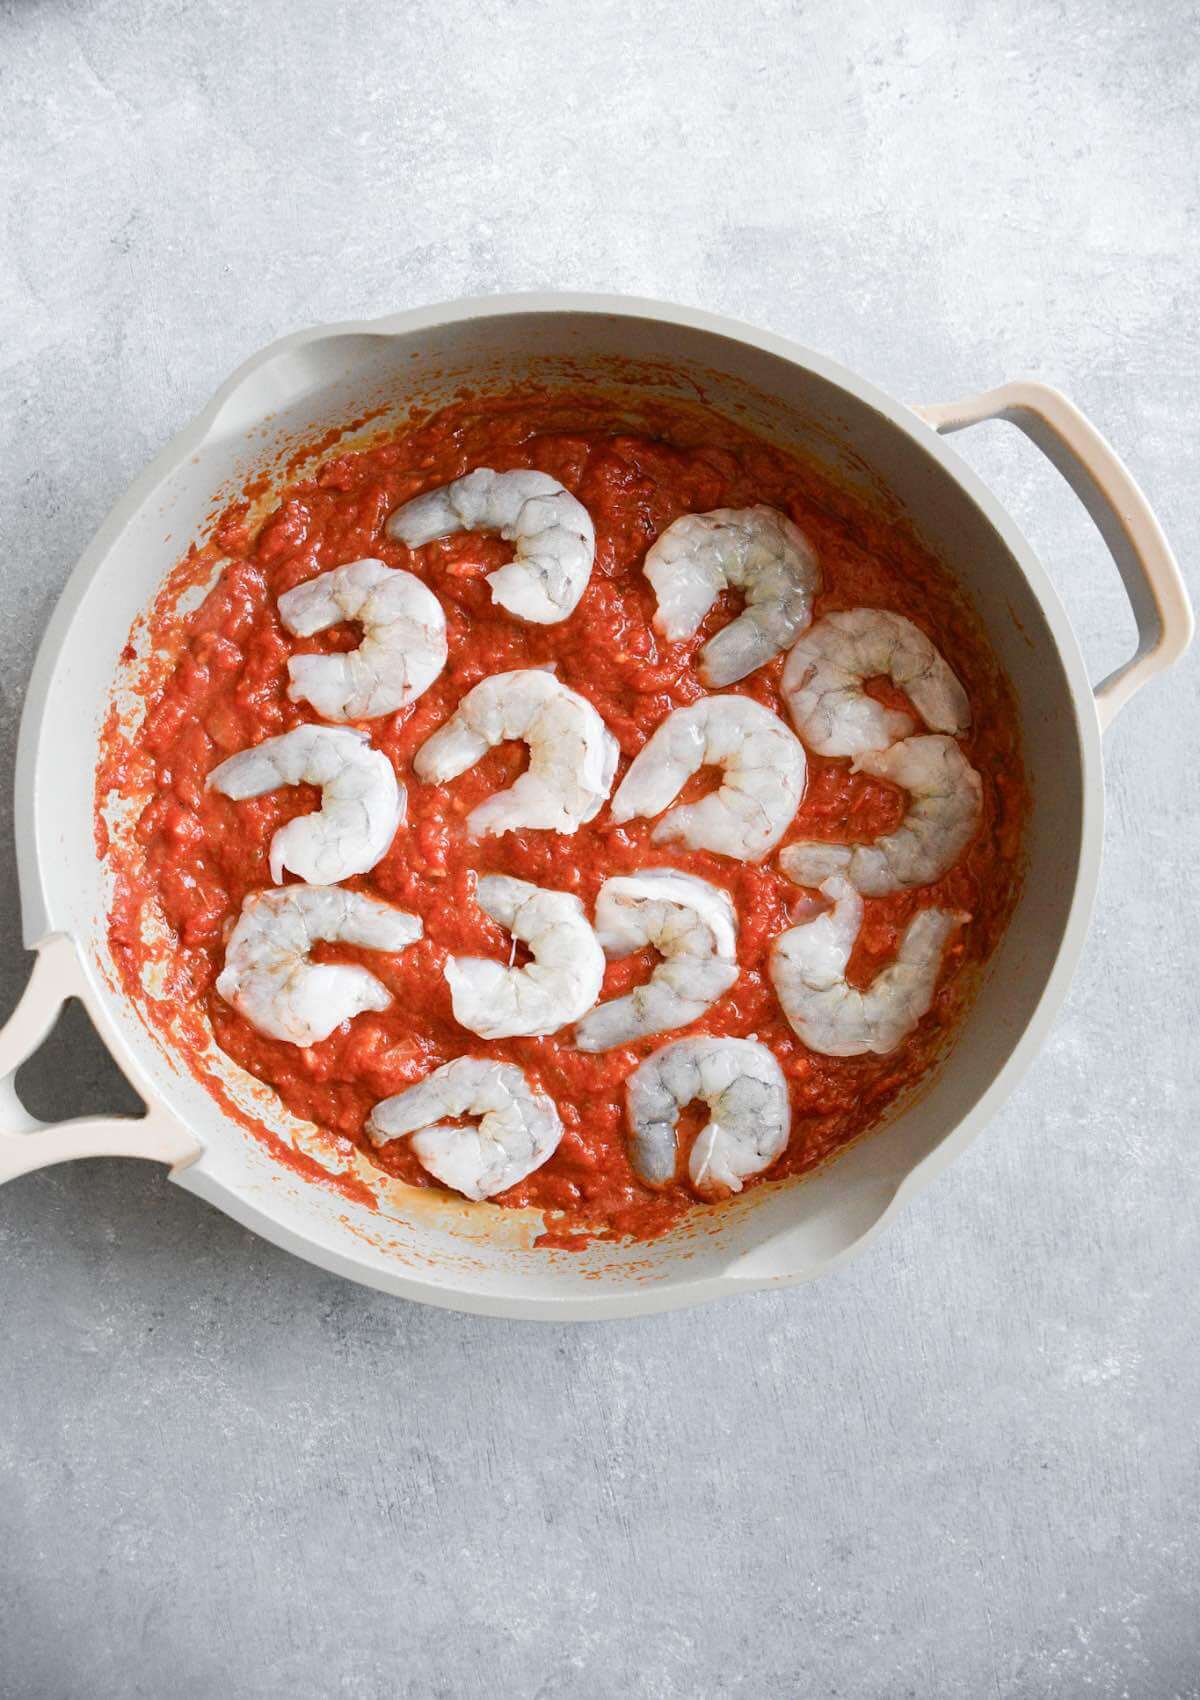 raw shrimp in a frying pan with tomato sauce.